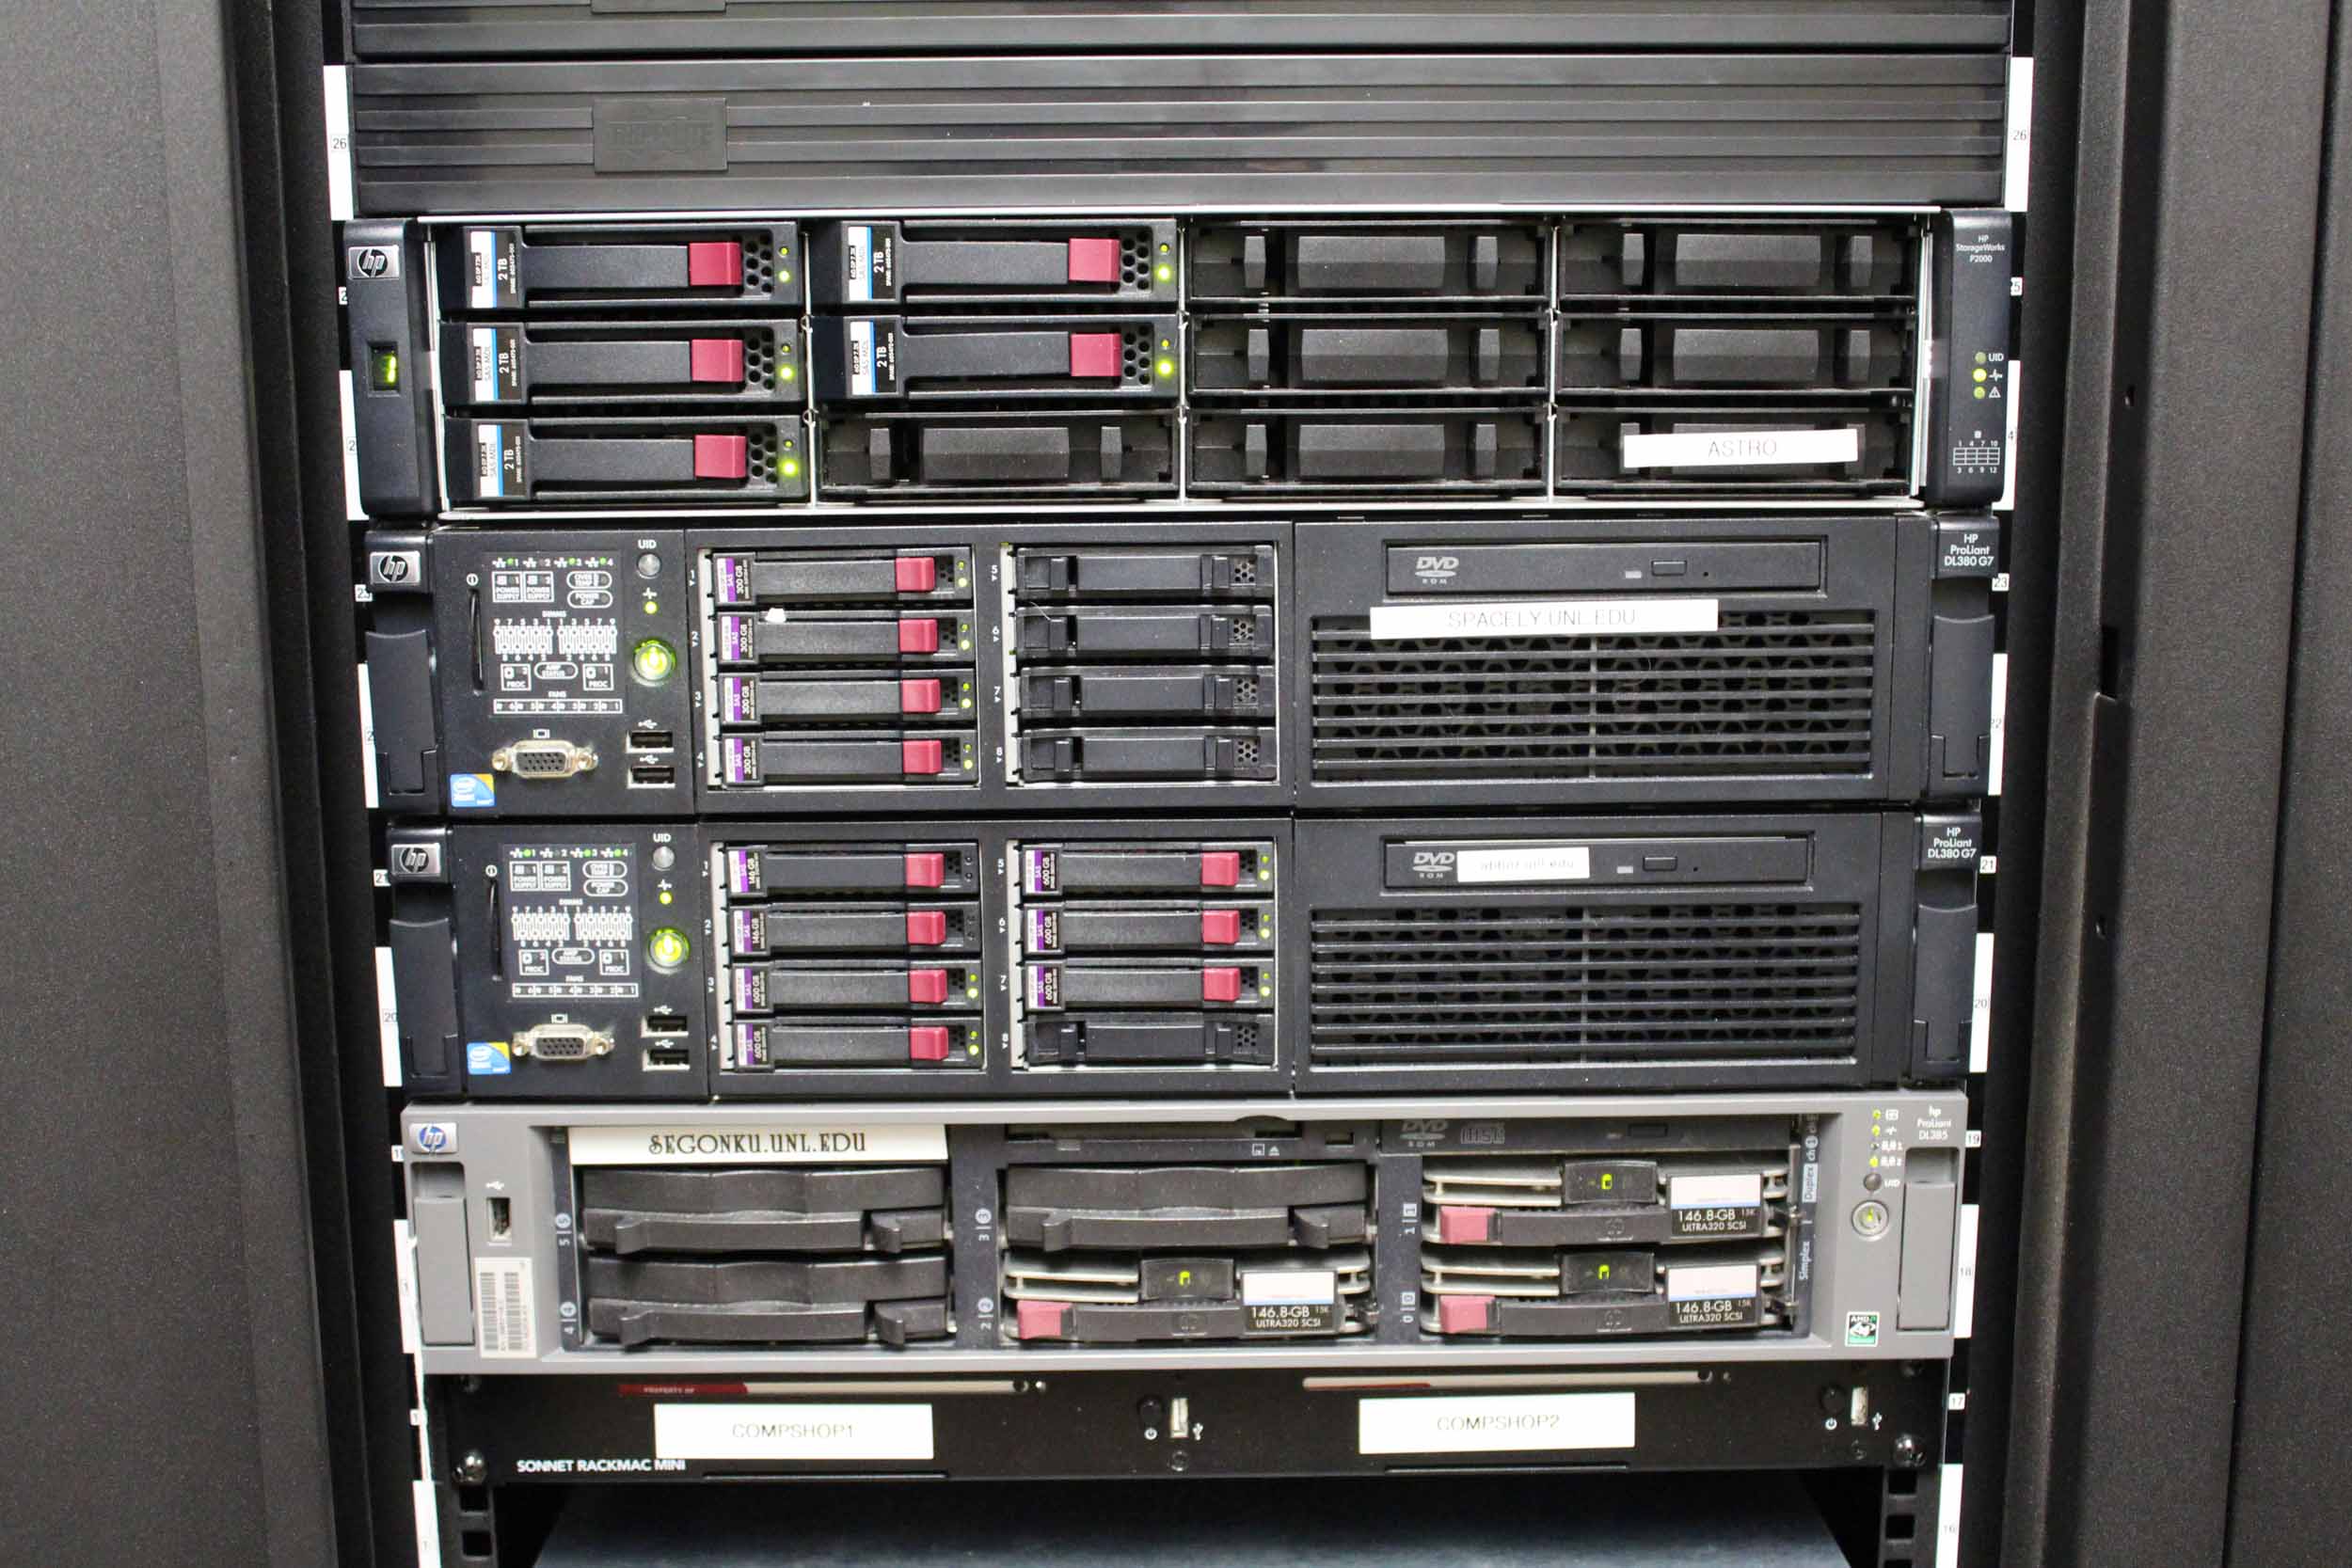 The Spacely server, one of LEAP's unsung heroes. This server (now retired) was the principal site for project team file exchange during the main phase of the project's development. Copyright Livingstone Online. Creative Commons Attribution-NonCommercial 3.0 Unported (https://creativecommons.org/licenses/by-nc/3.0/).